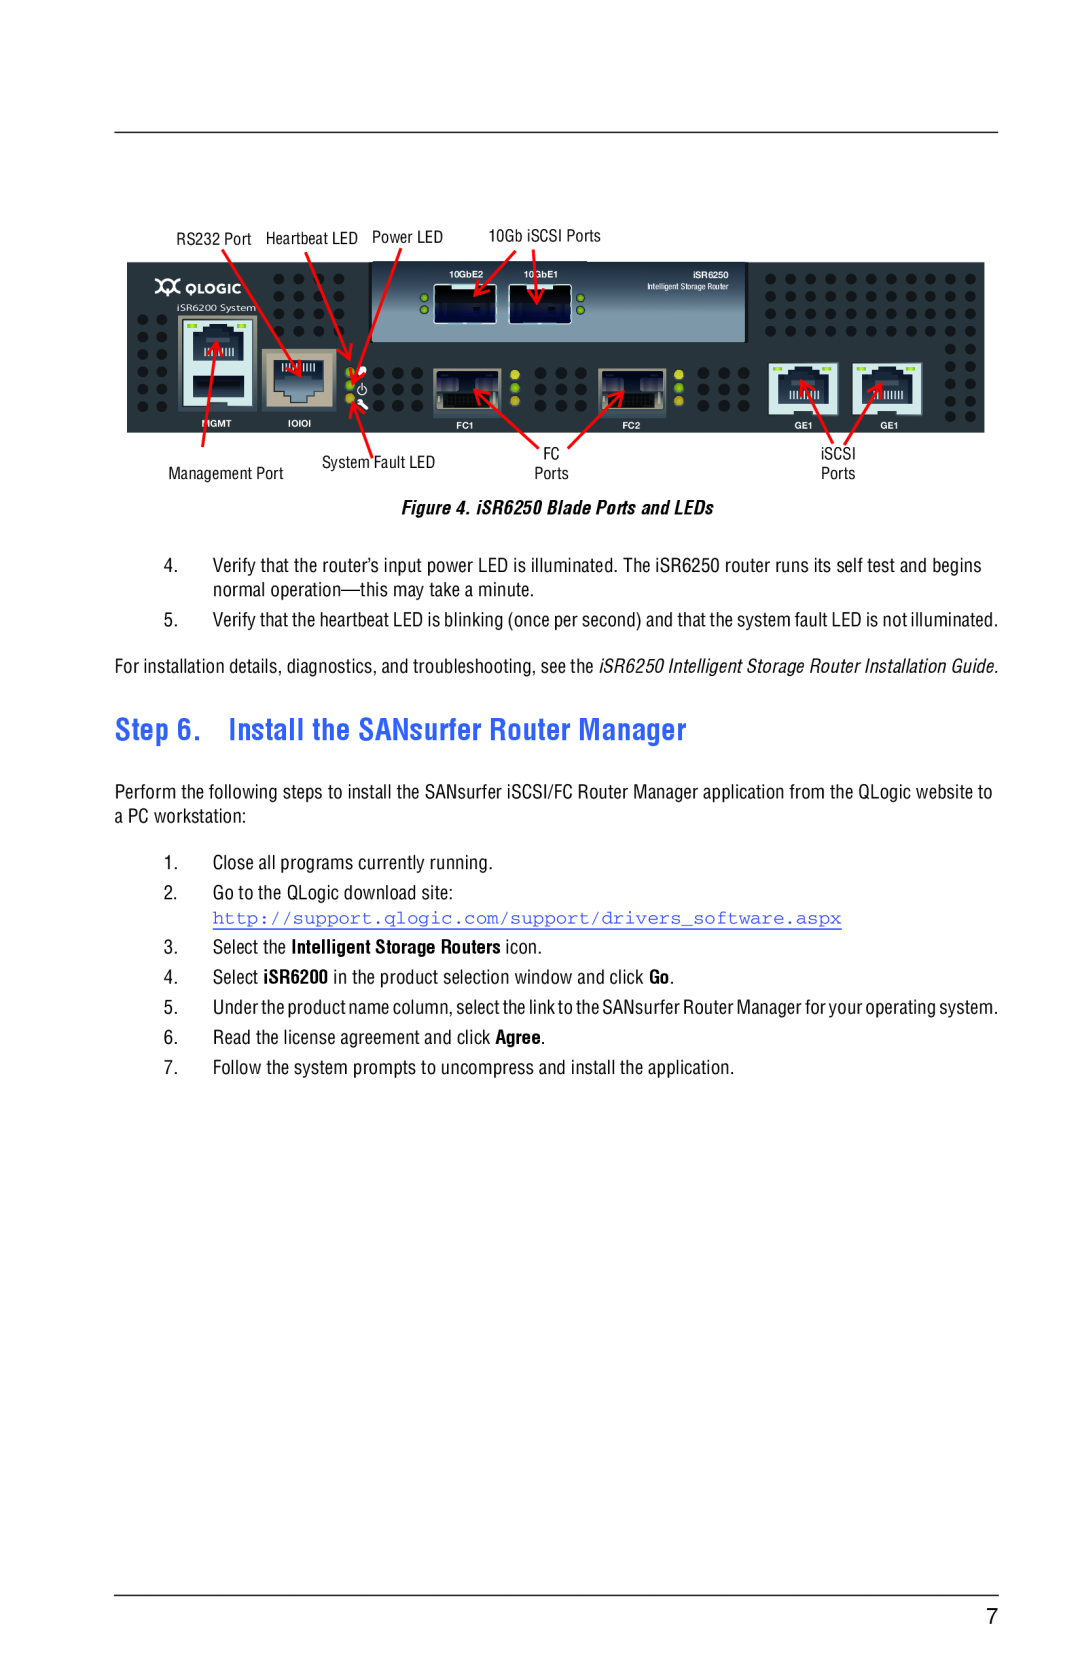 Q-Logic ISR6250 quick start Install the SANsurfer Router Manager, iSR6250 Blade Ports and LEDs 